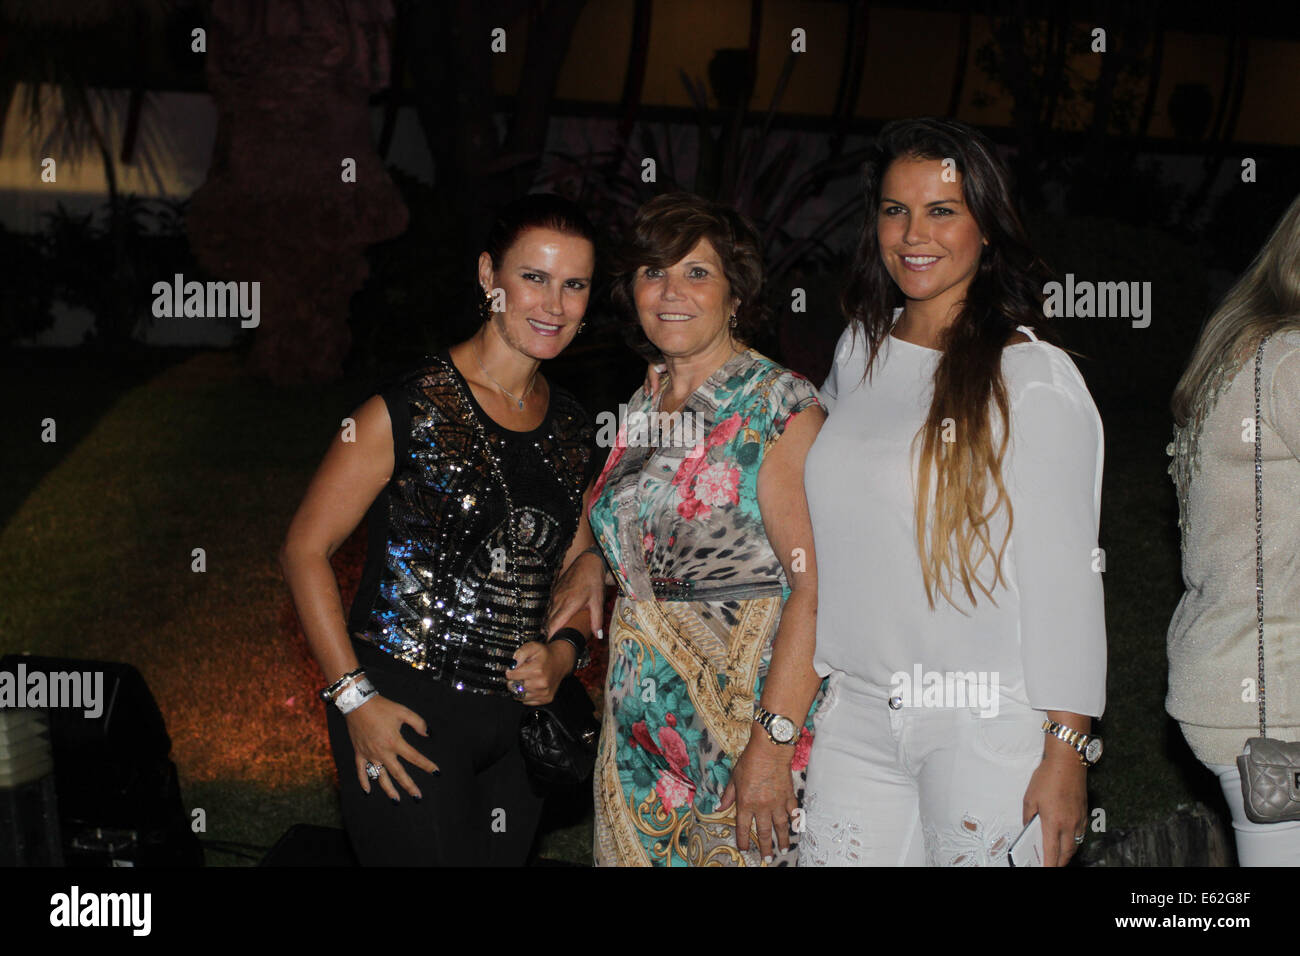 Algarve, Portugal. 11th Aug, 2014. Cristiano Ronaldo's mother, Dolores Aveiro (center) and sisters Elma (left) and Katia (right) waiting for Paris Hilton, as she'll play as DJ at Disco Seven in Vilamoura, Algarve, Portugal, 11.08.2014 Credit:  images4/Alamy Live News Stock Photo